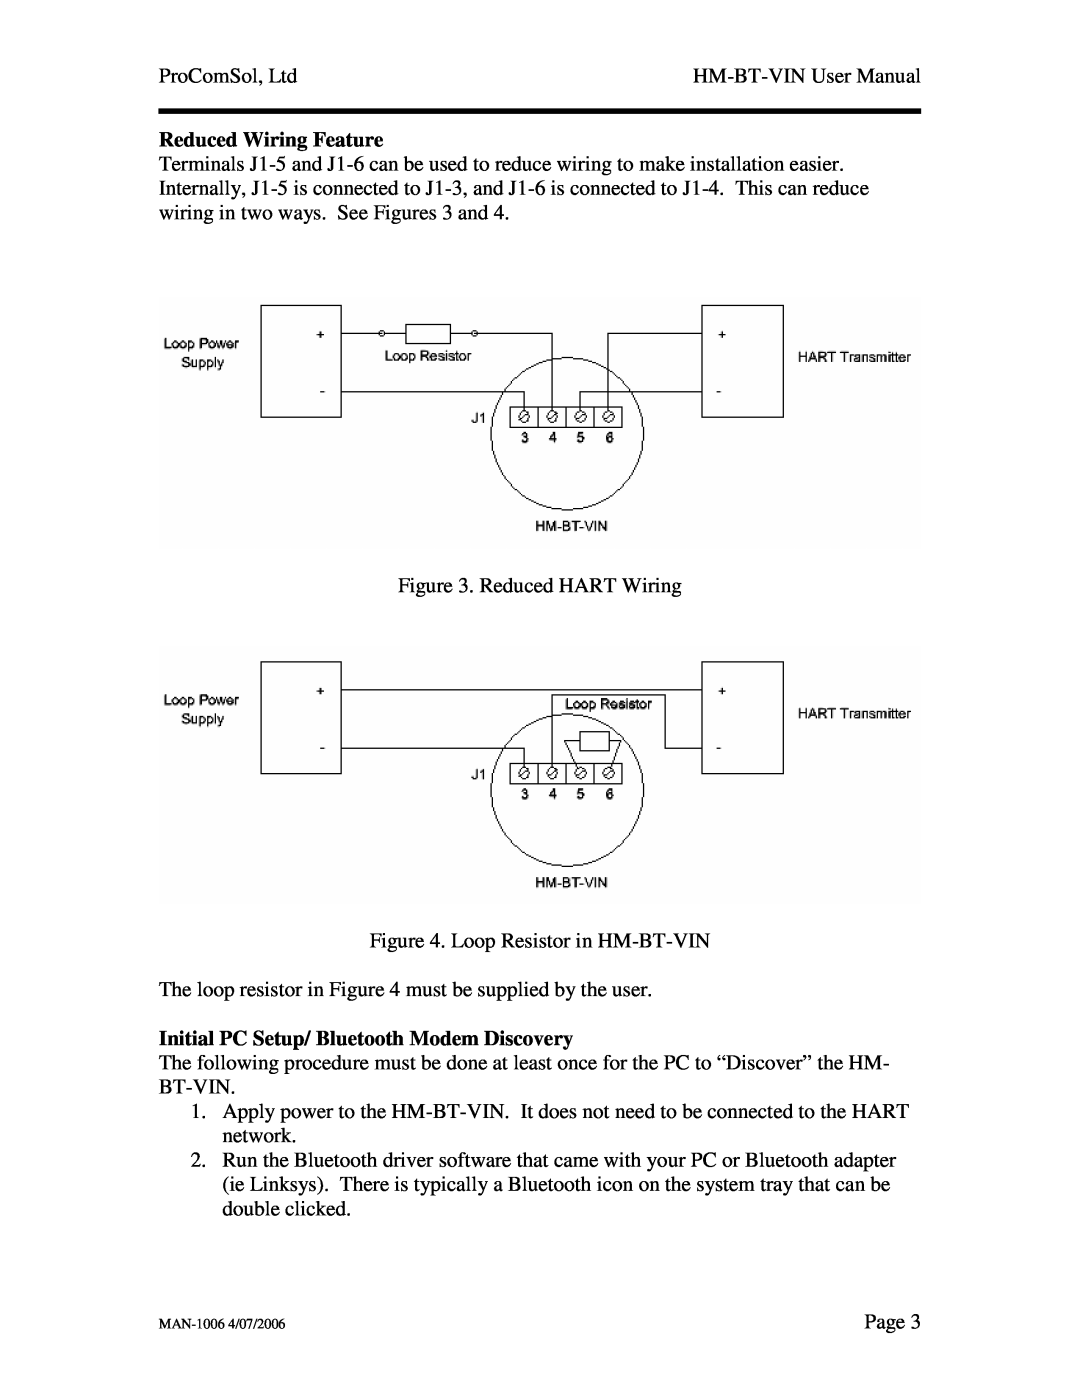 Linksys HM-BT-VIN user manual Reduced Wiring Feature, Initial PC Setup/ Bluetooth Modem Discovery 